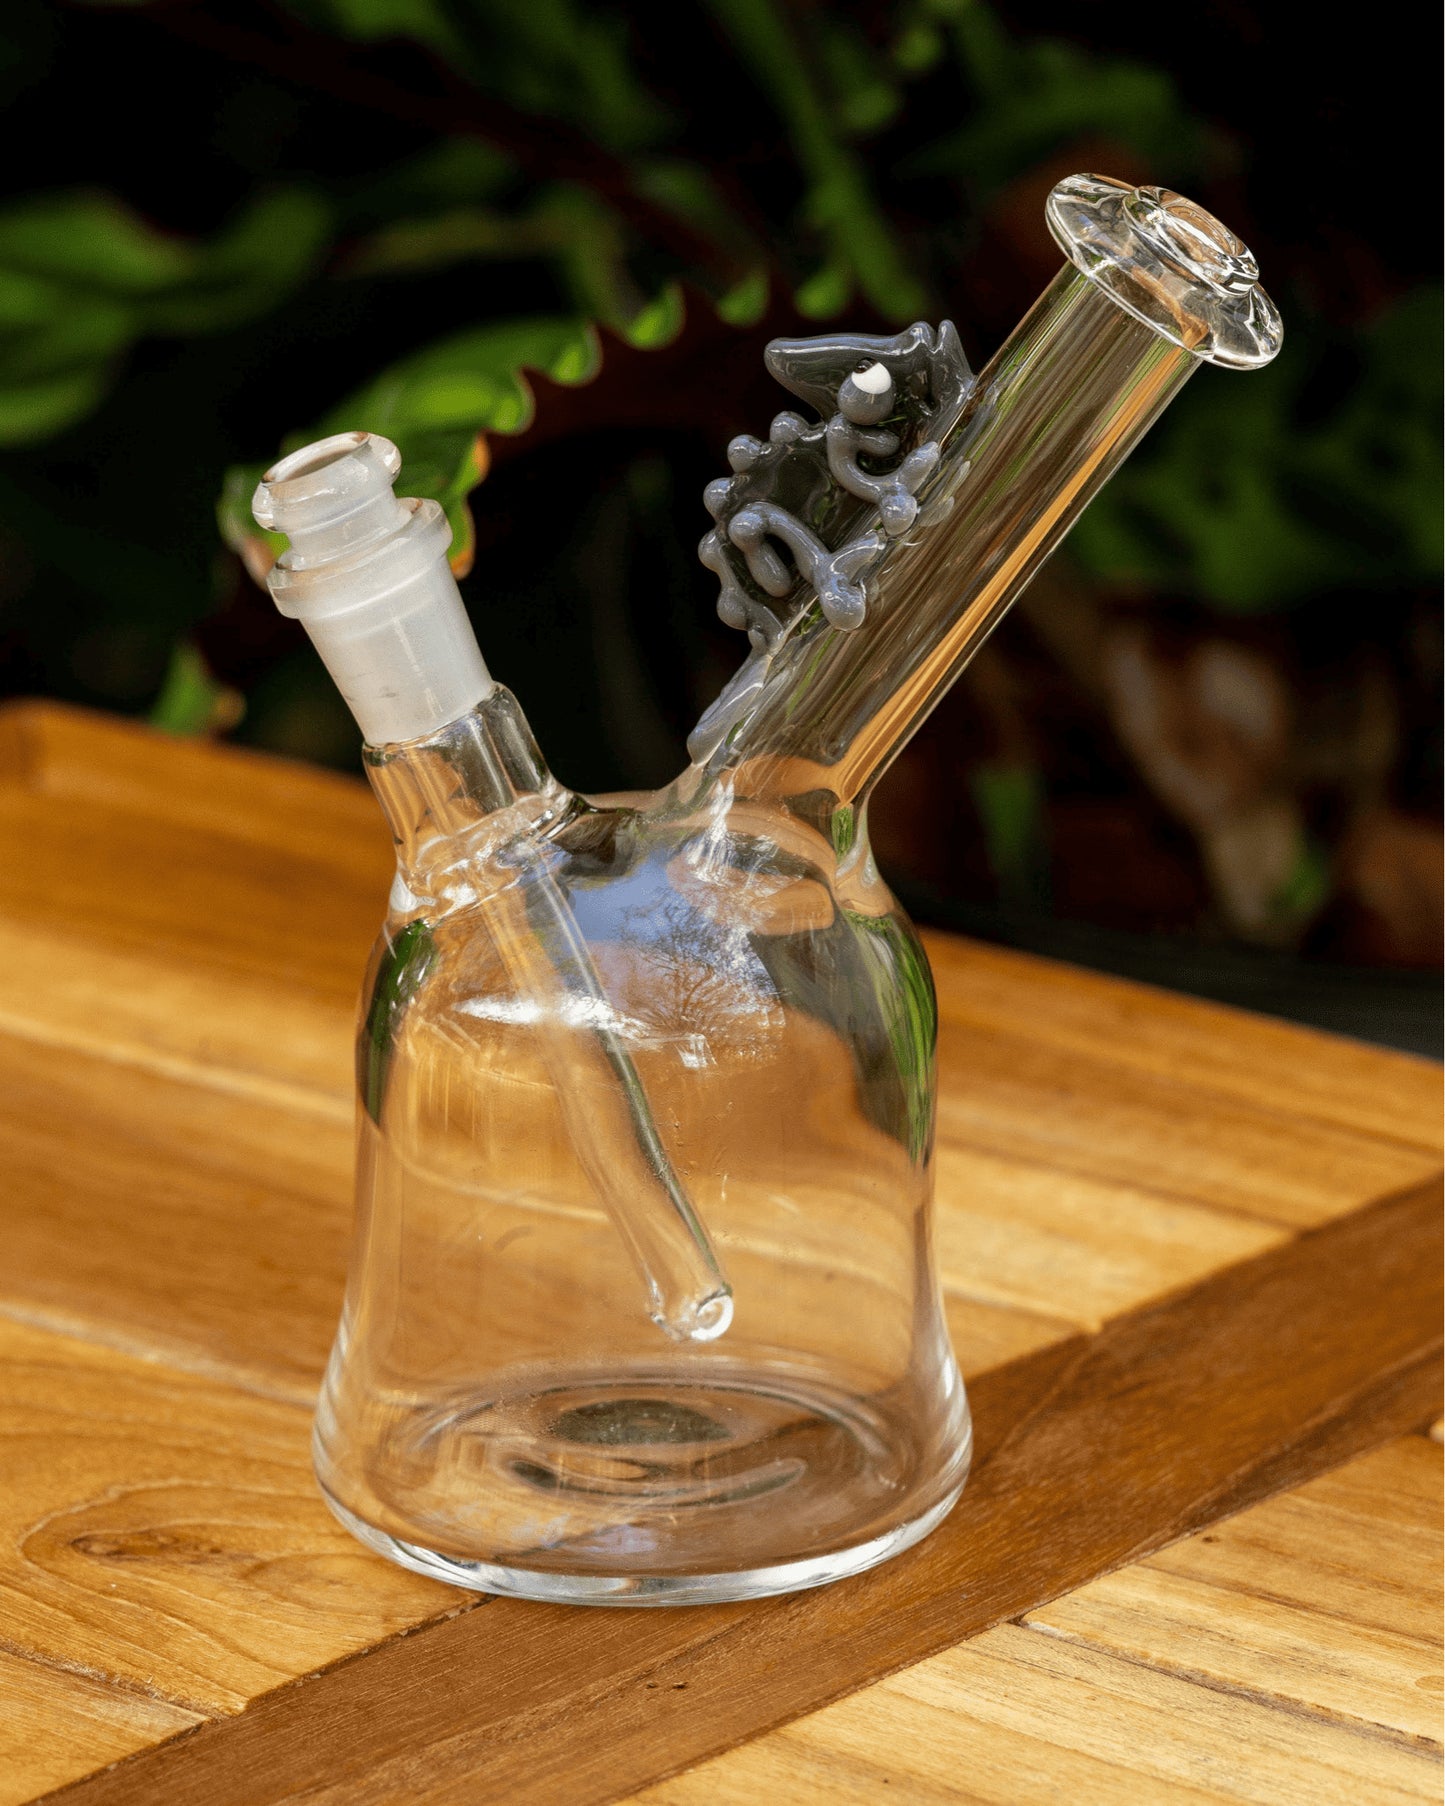 artisan-crafted design of the Clear Rig w/ Gray Chameleon (A) by Willy That Glass Guy